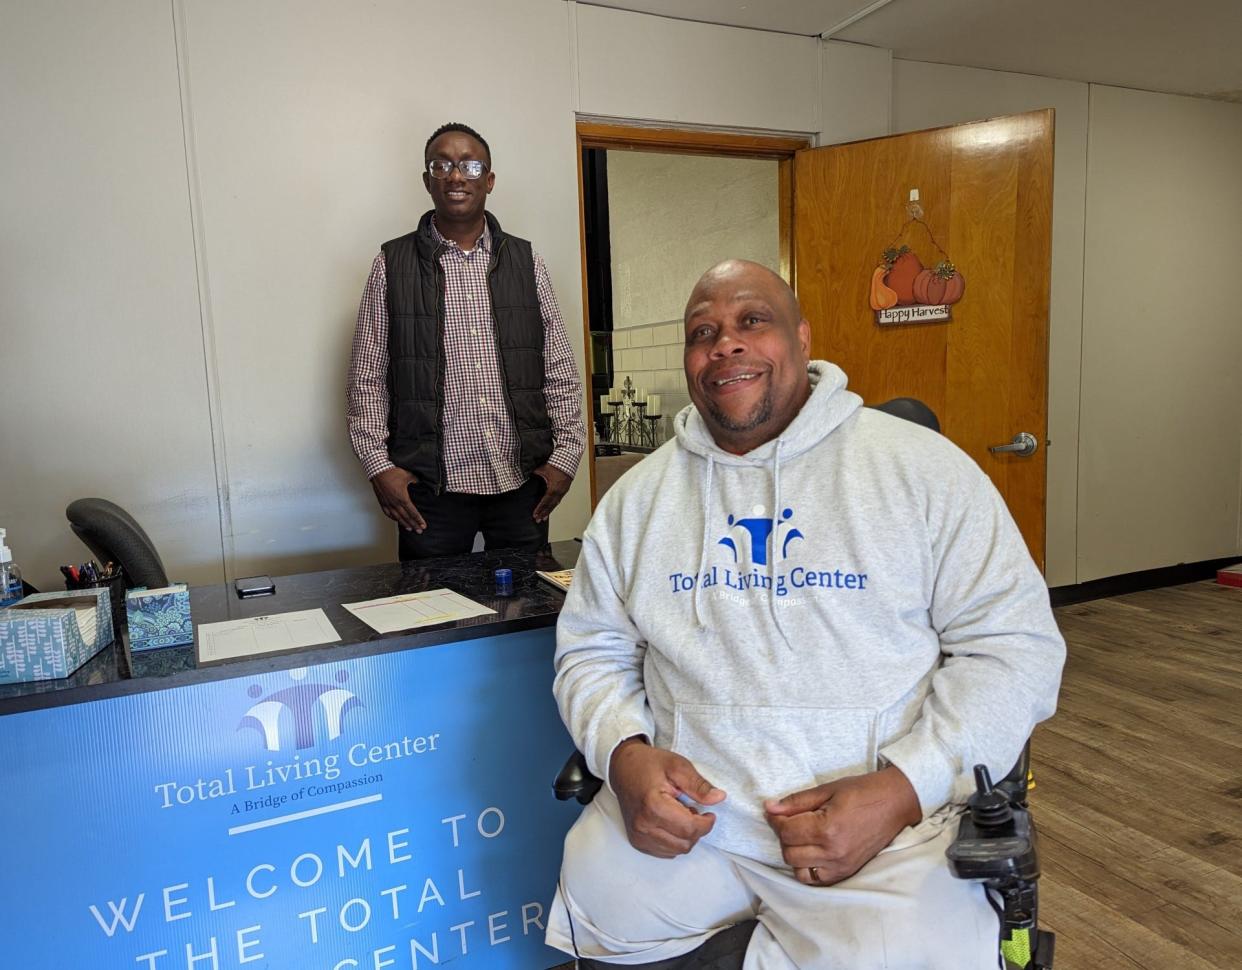 Volunteer Charley Baldwin, right, is now a regular volunteer at the Total Living Center in Canton. The Rev. Ben Kariuki, left, said Baldwin's story is one that needs to be shared.